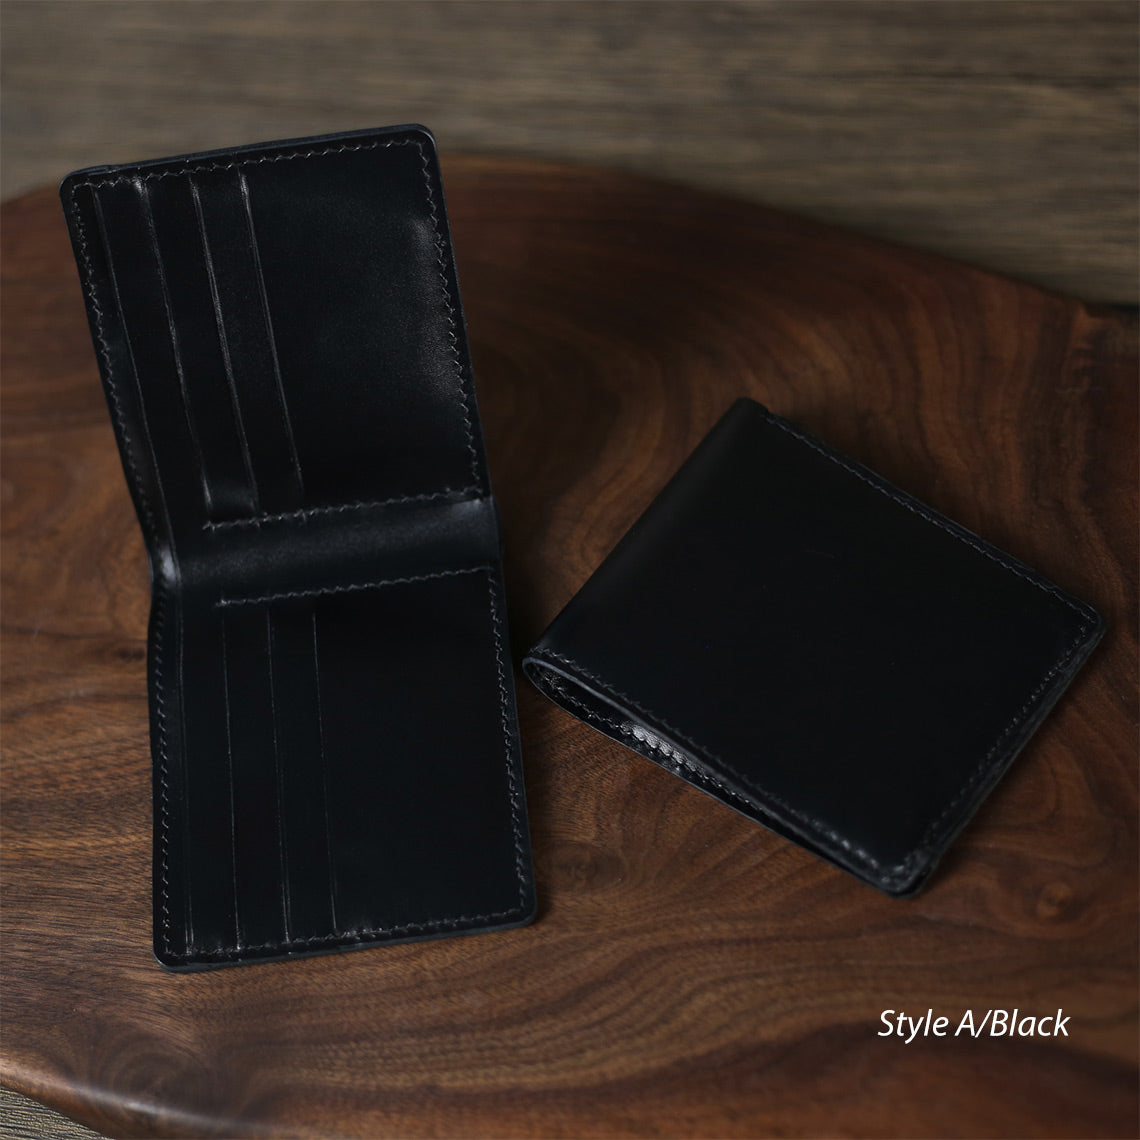 DIY Leather Wallet Kit | Sew Up Your Own Minimalist Card Wallet - POPSEWING™ DIY Leathercrafts